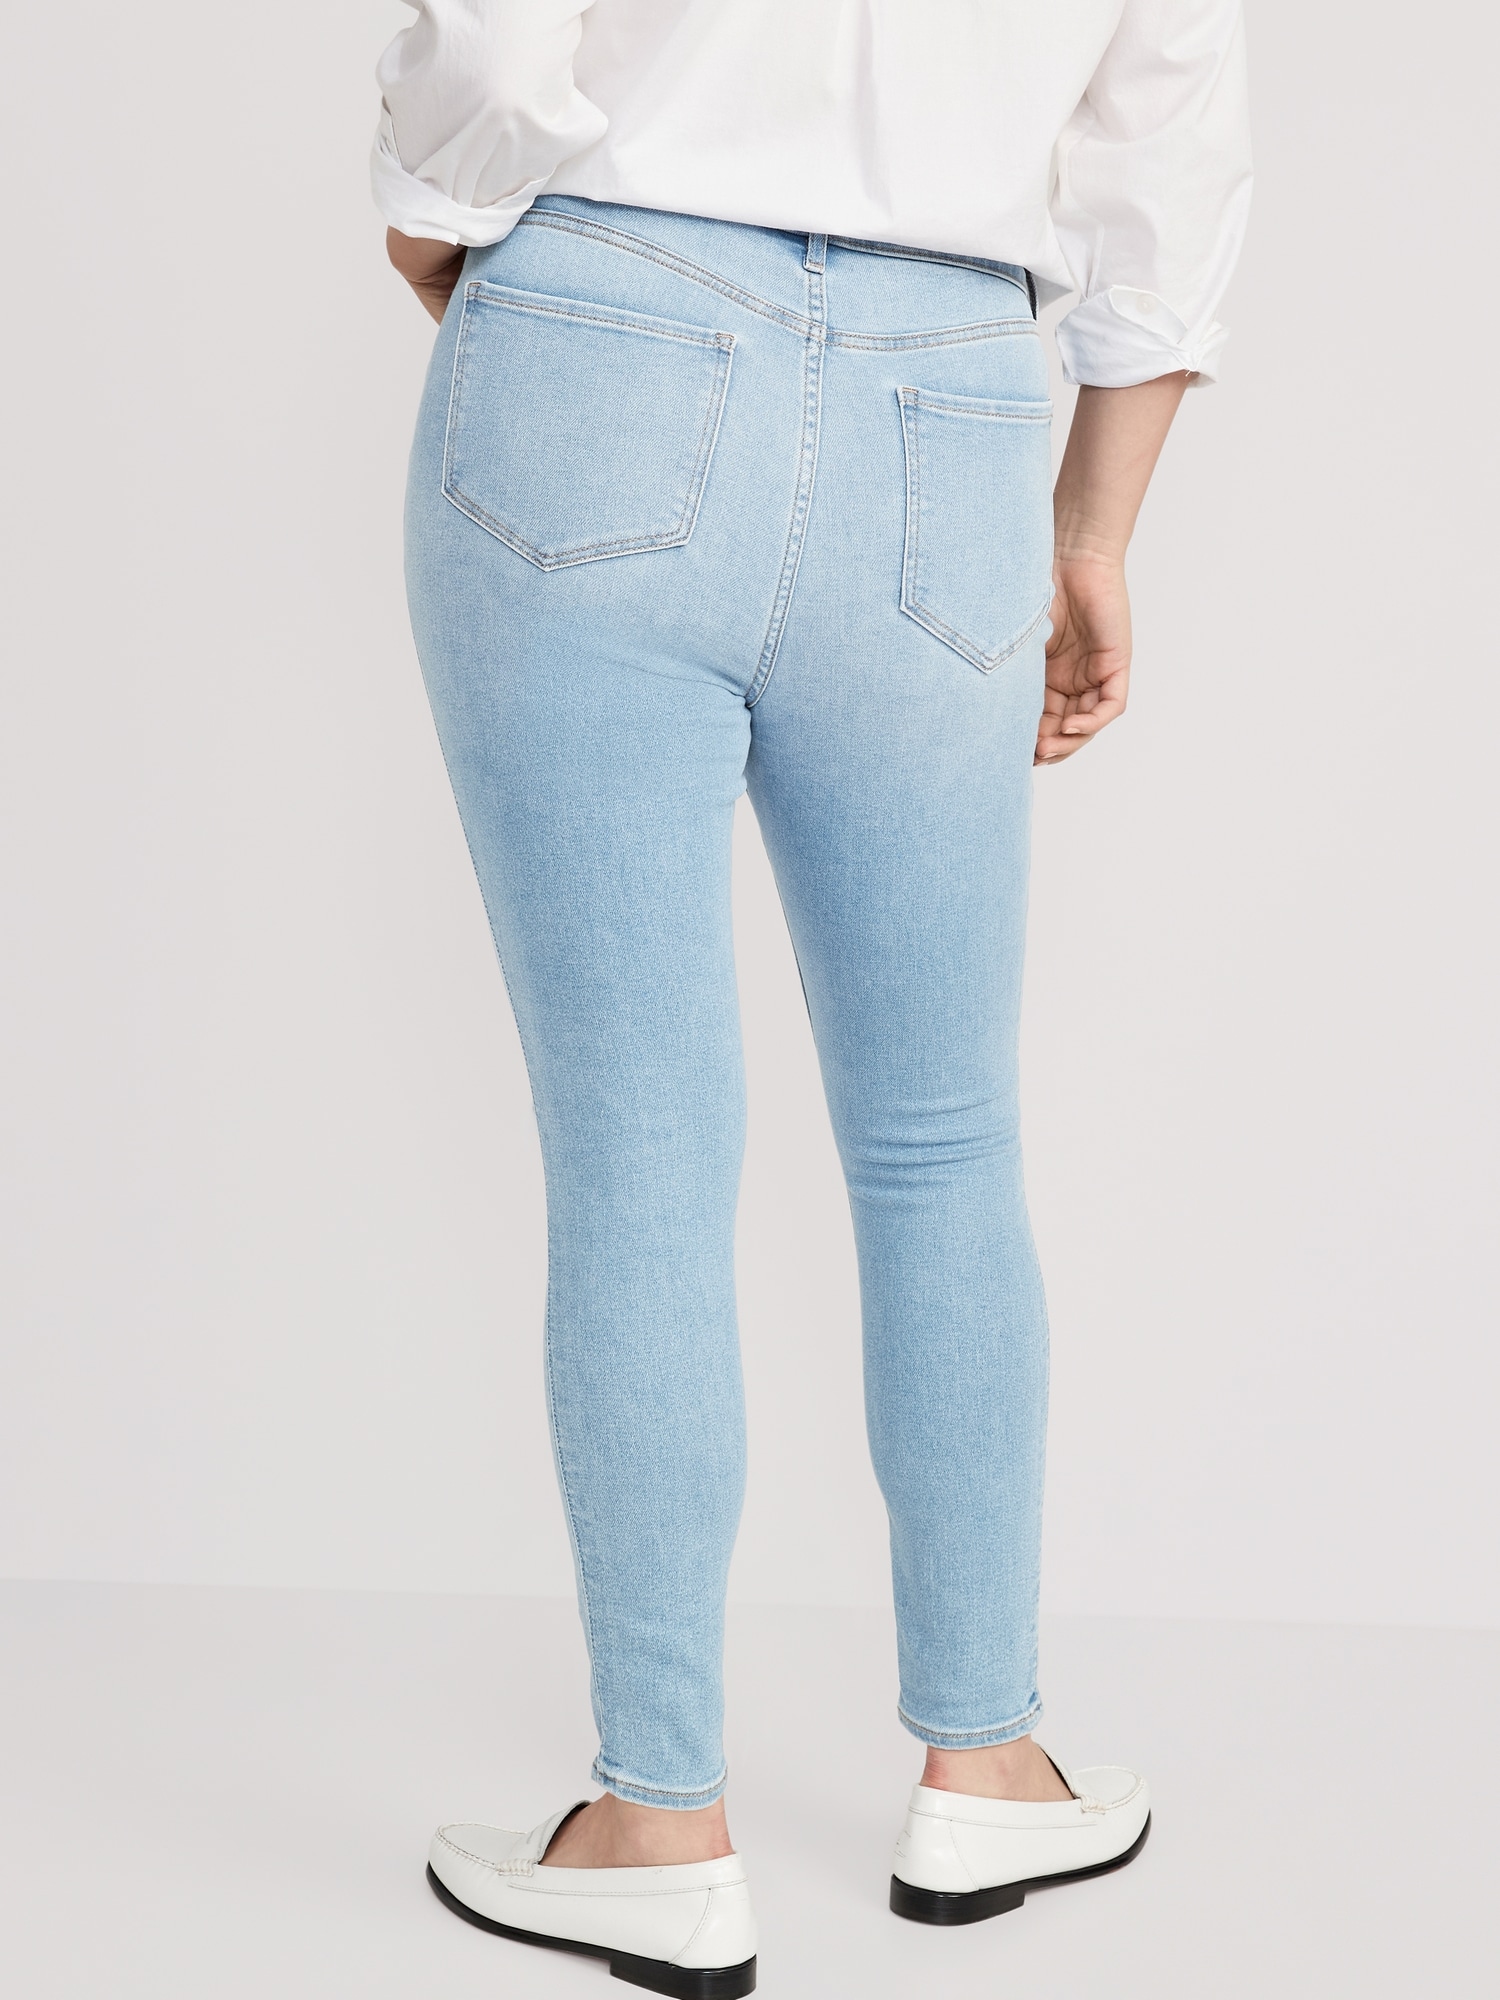 Extra High-Waisted | Super-Skinny Rockstar Navy Stretch for Old Women Jeans 360°